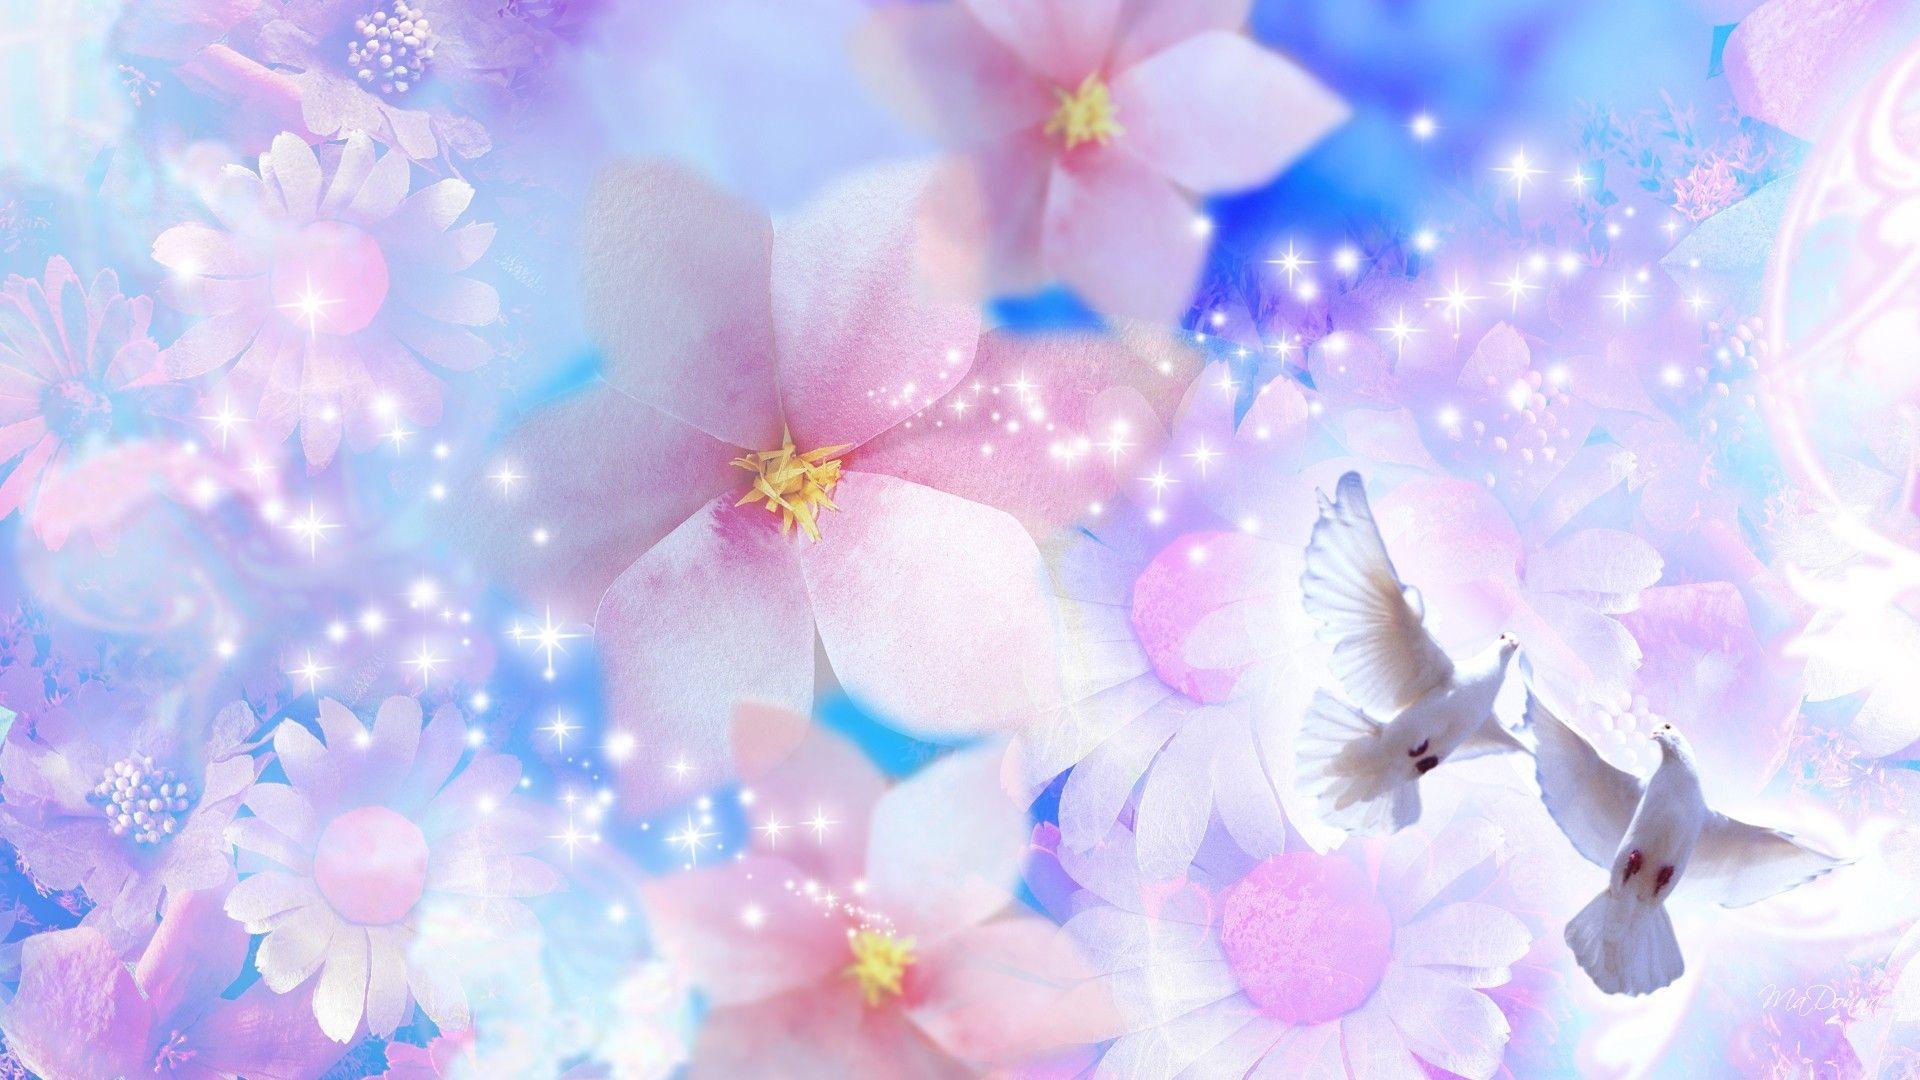 Doves Tag wallpaper: Peaceful Pastel Prophecy Radiate Pink Glow